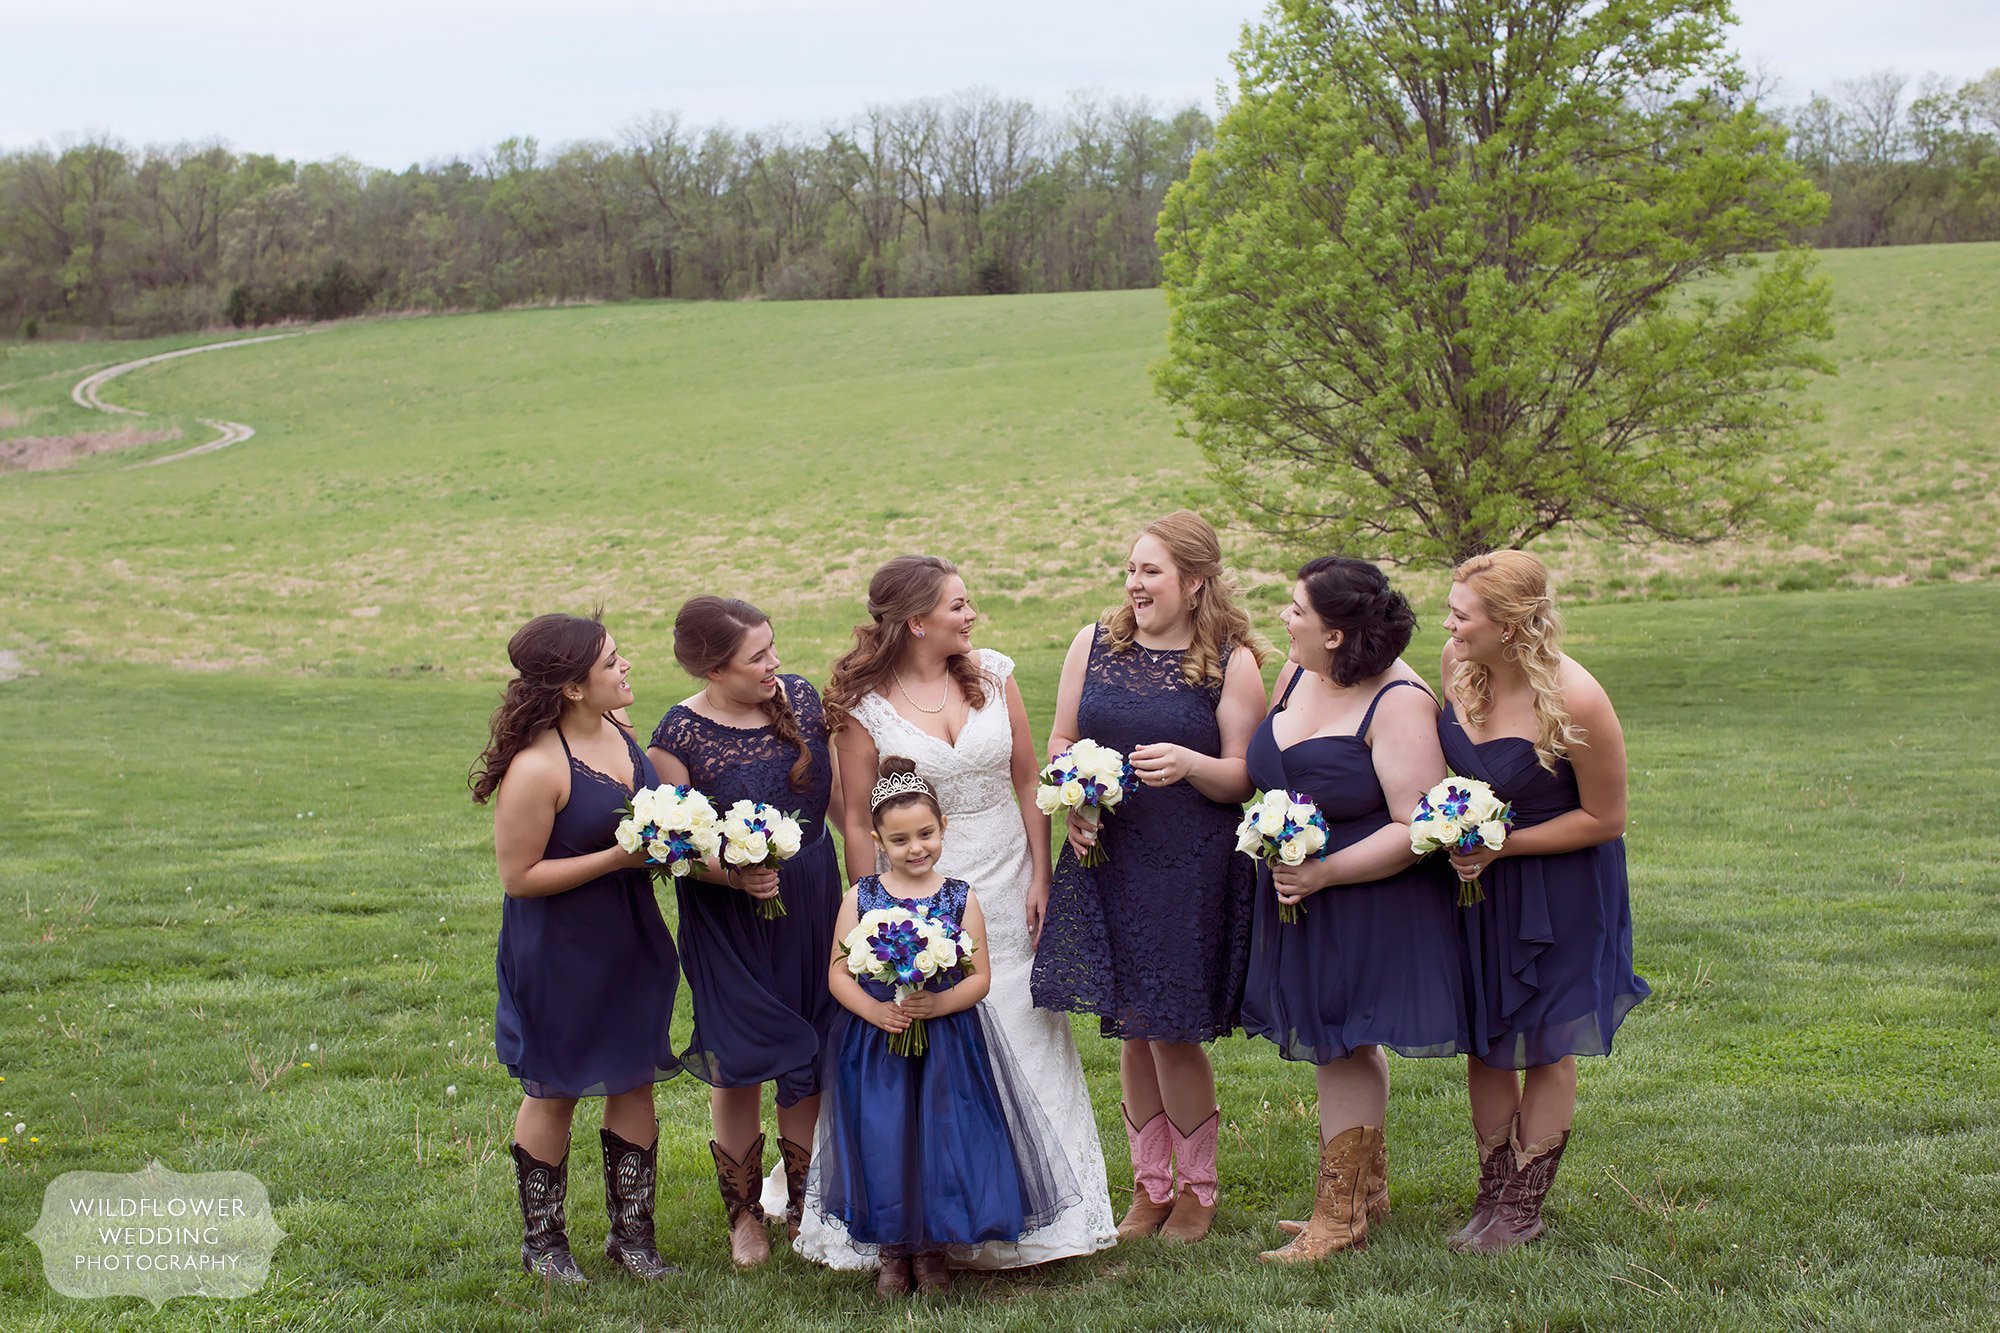 Smiling bridesmaids in navy dresses at this country wedding in Missouri.